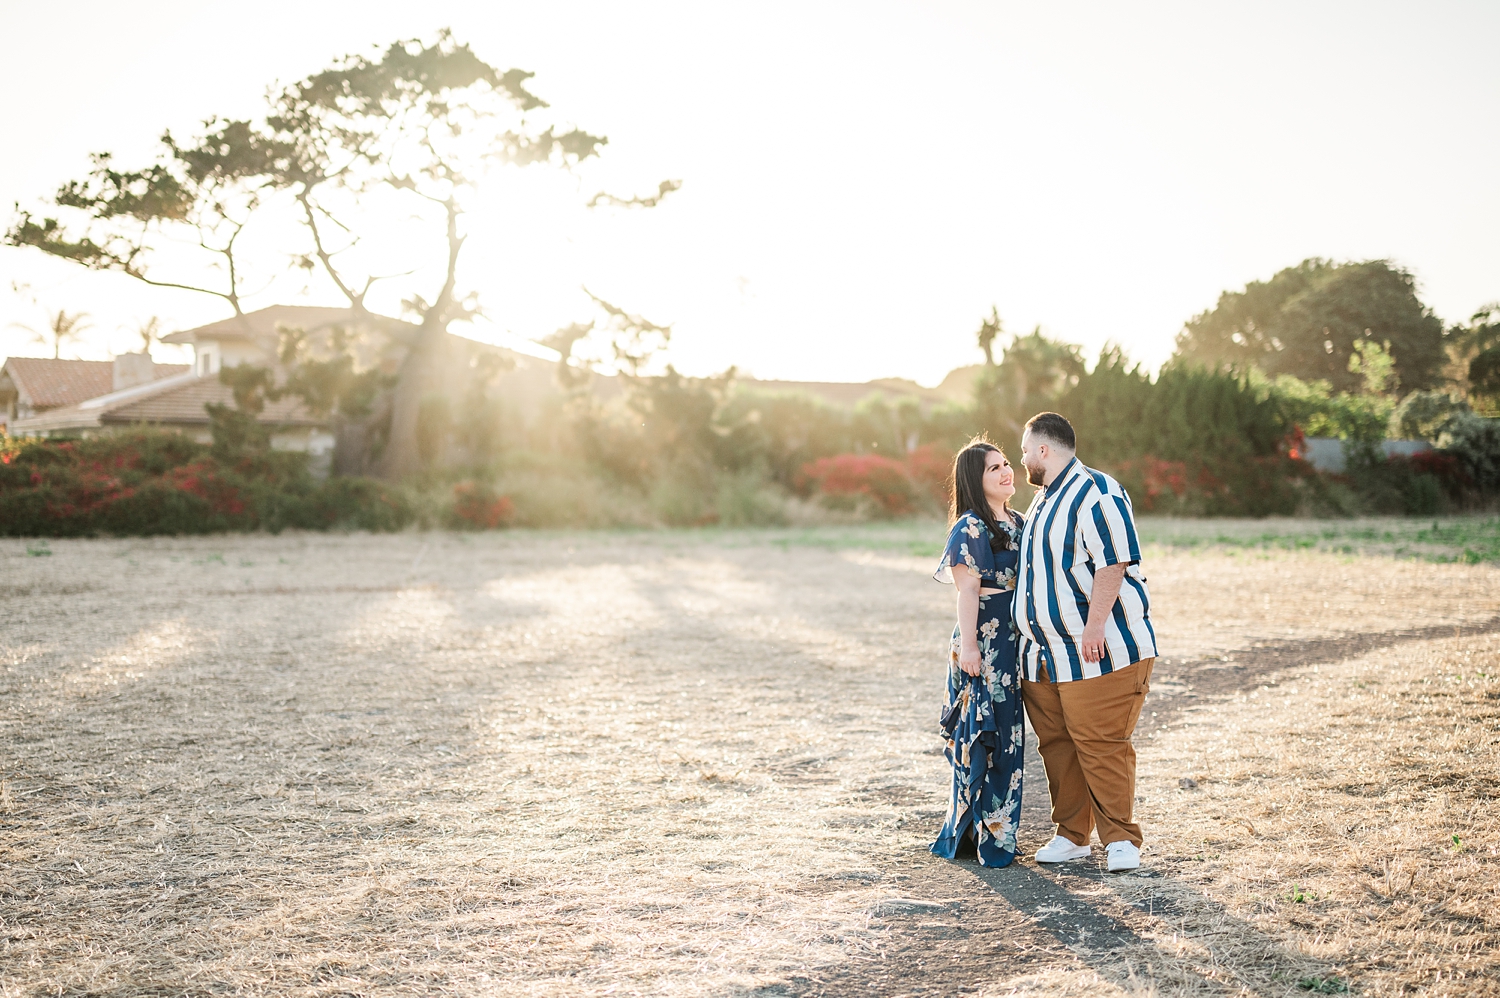 Beach Cliffs Engagement Session at Sunset | Nataly Hernandez Photography | Edwin and Susana-49.jpg